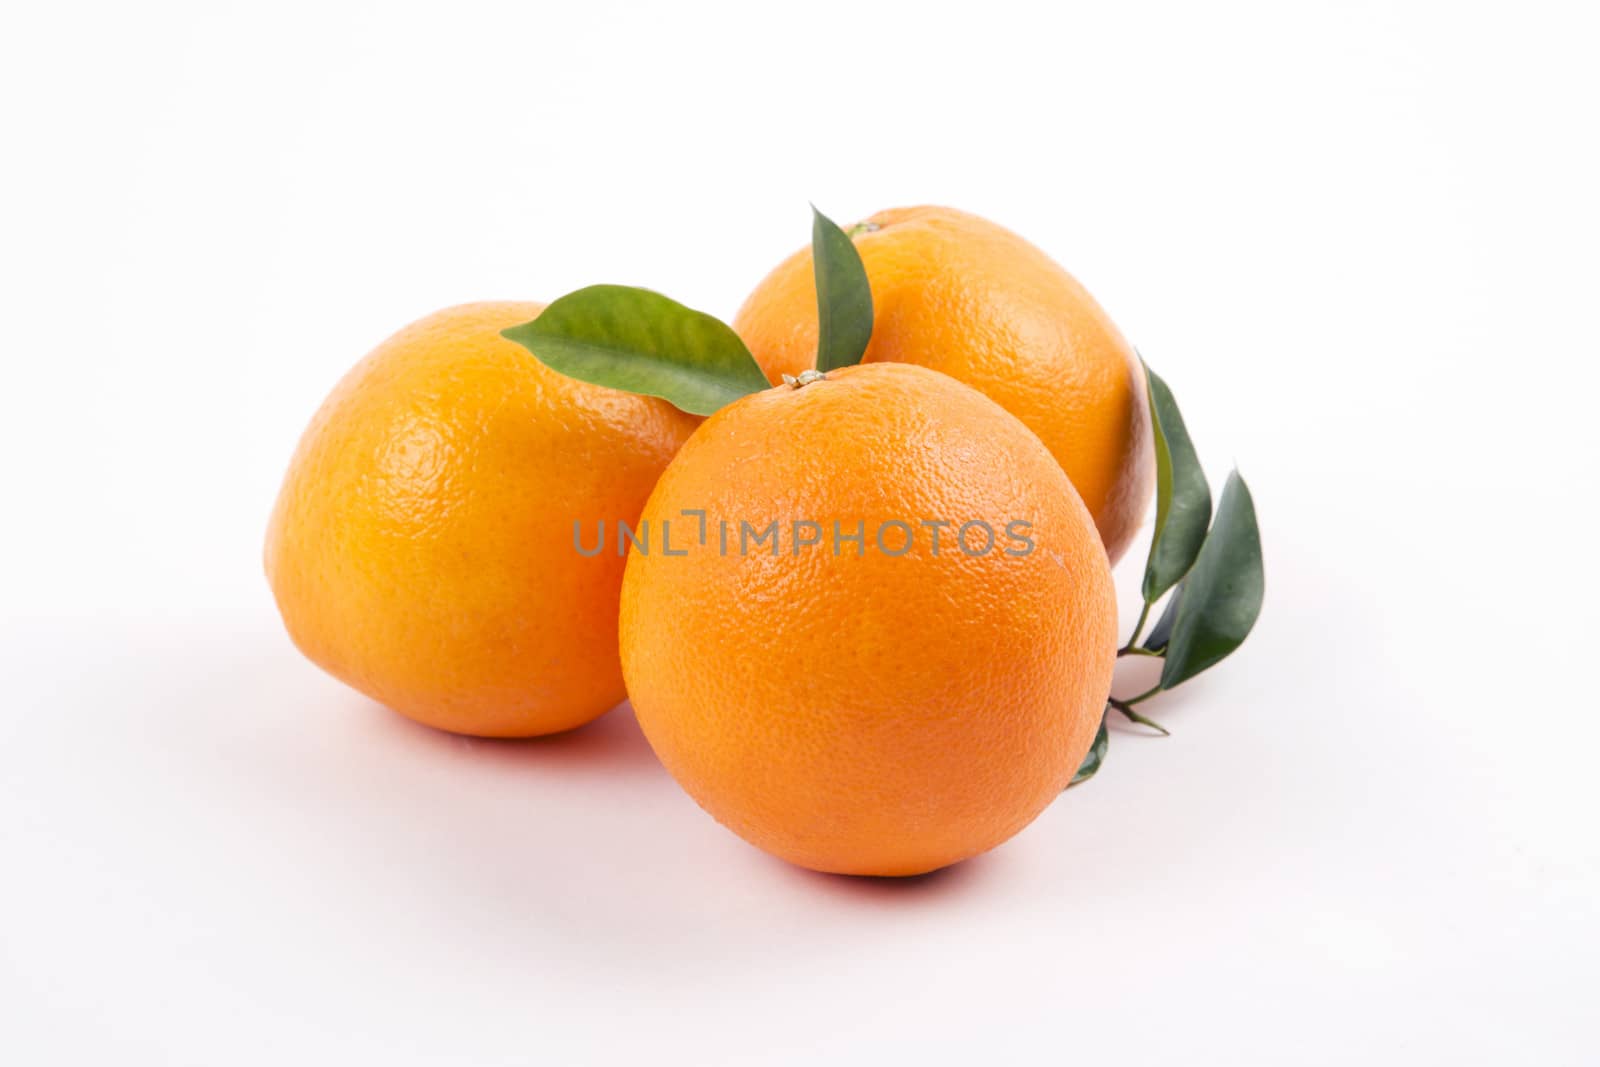 Fresh oranges with leaves on a white background.